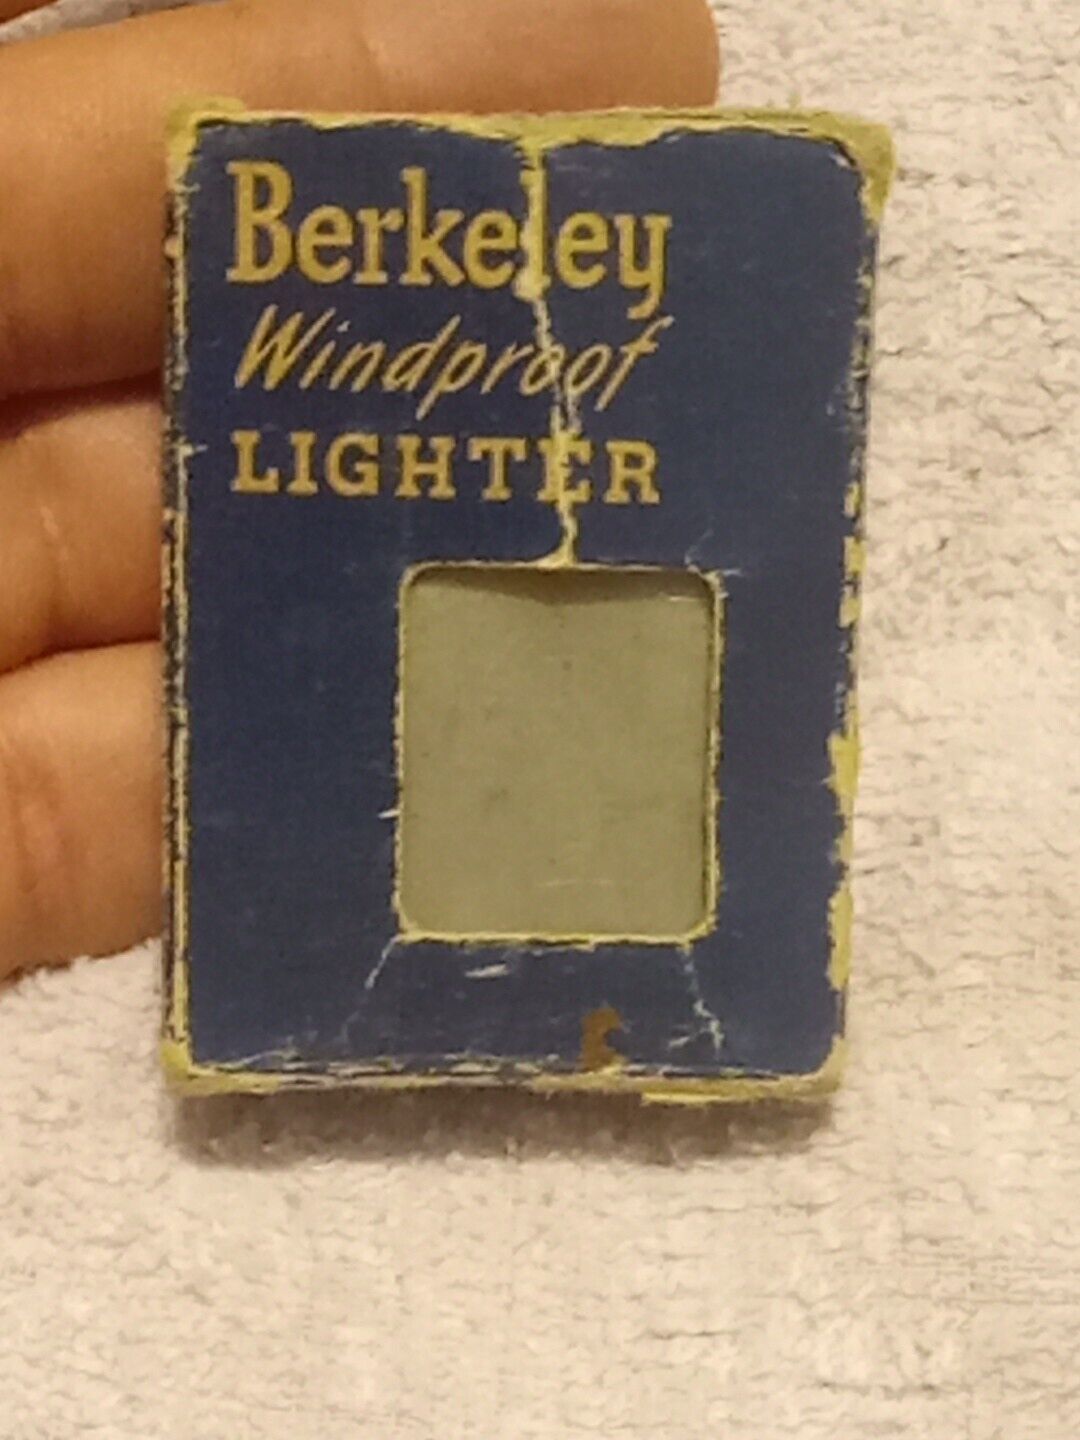 WW2 Era Berkeley Lighter With Box and Instructions USED CONDITION 